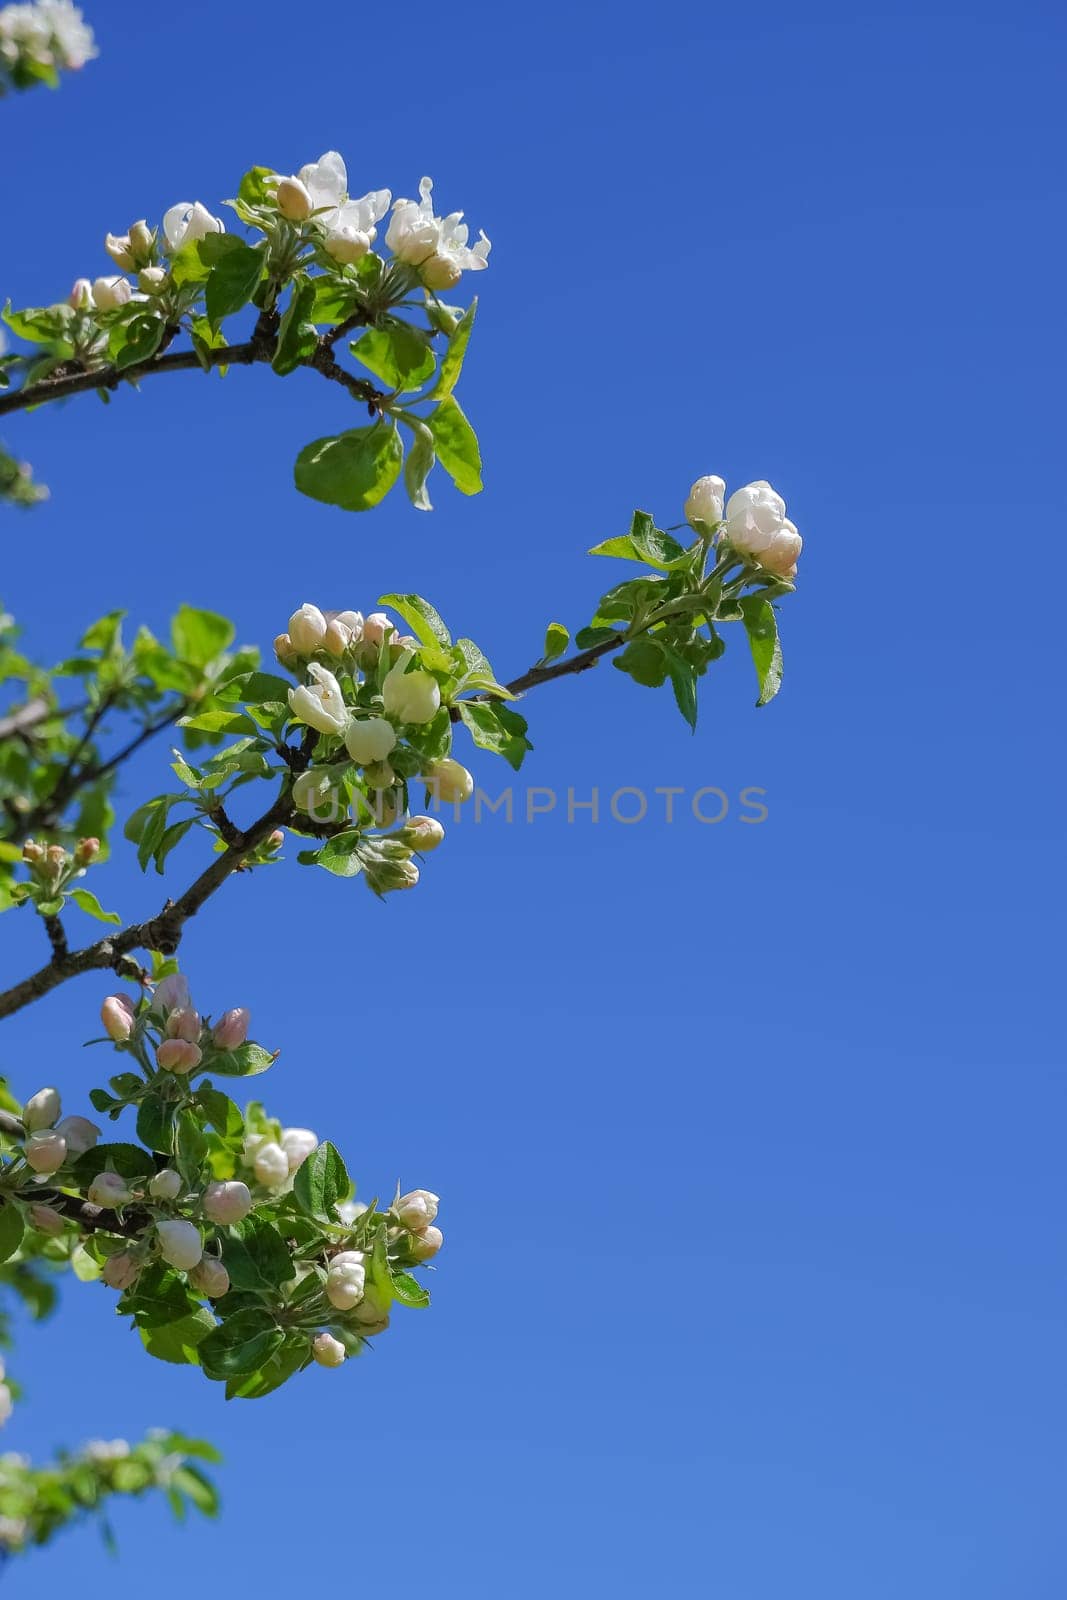 Frame from branches of apple trees with white flowers on blue sky background.white apple blossoms against a blue sky on a sunny day in spring. shallow depth of field.Copy space by YuliaYaspe1979